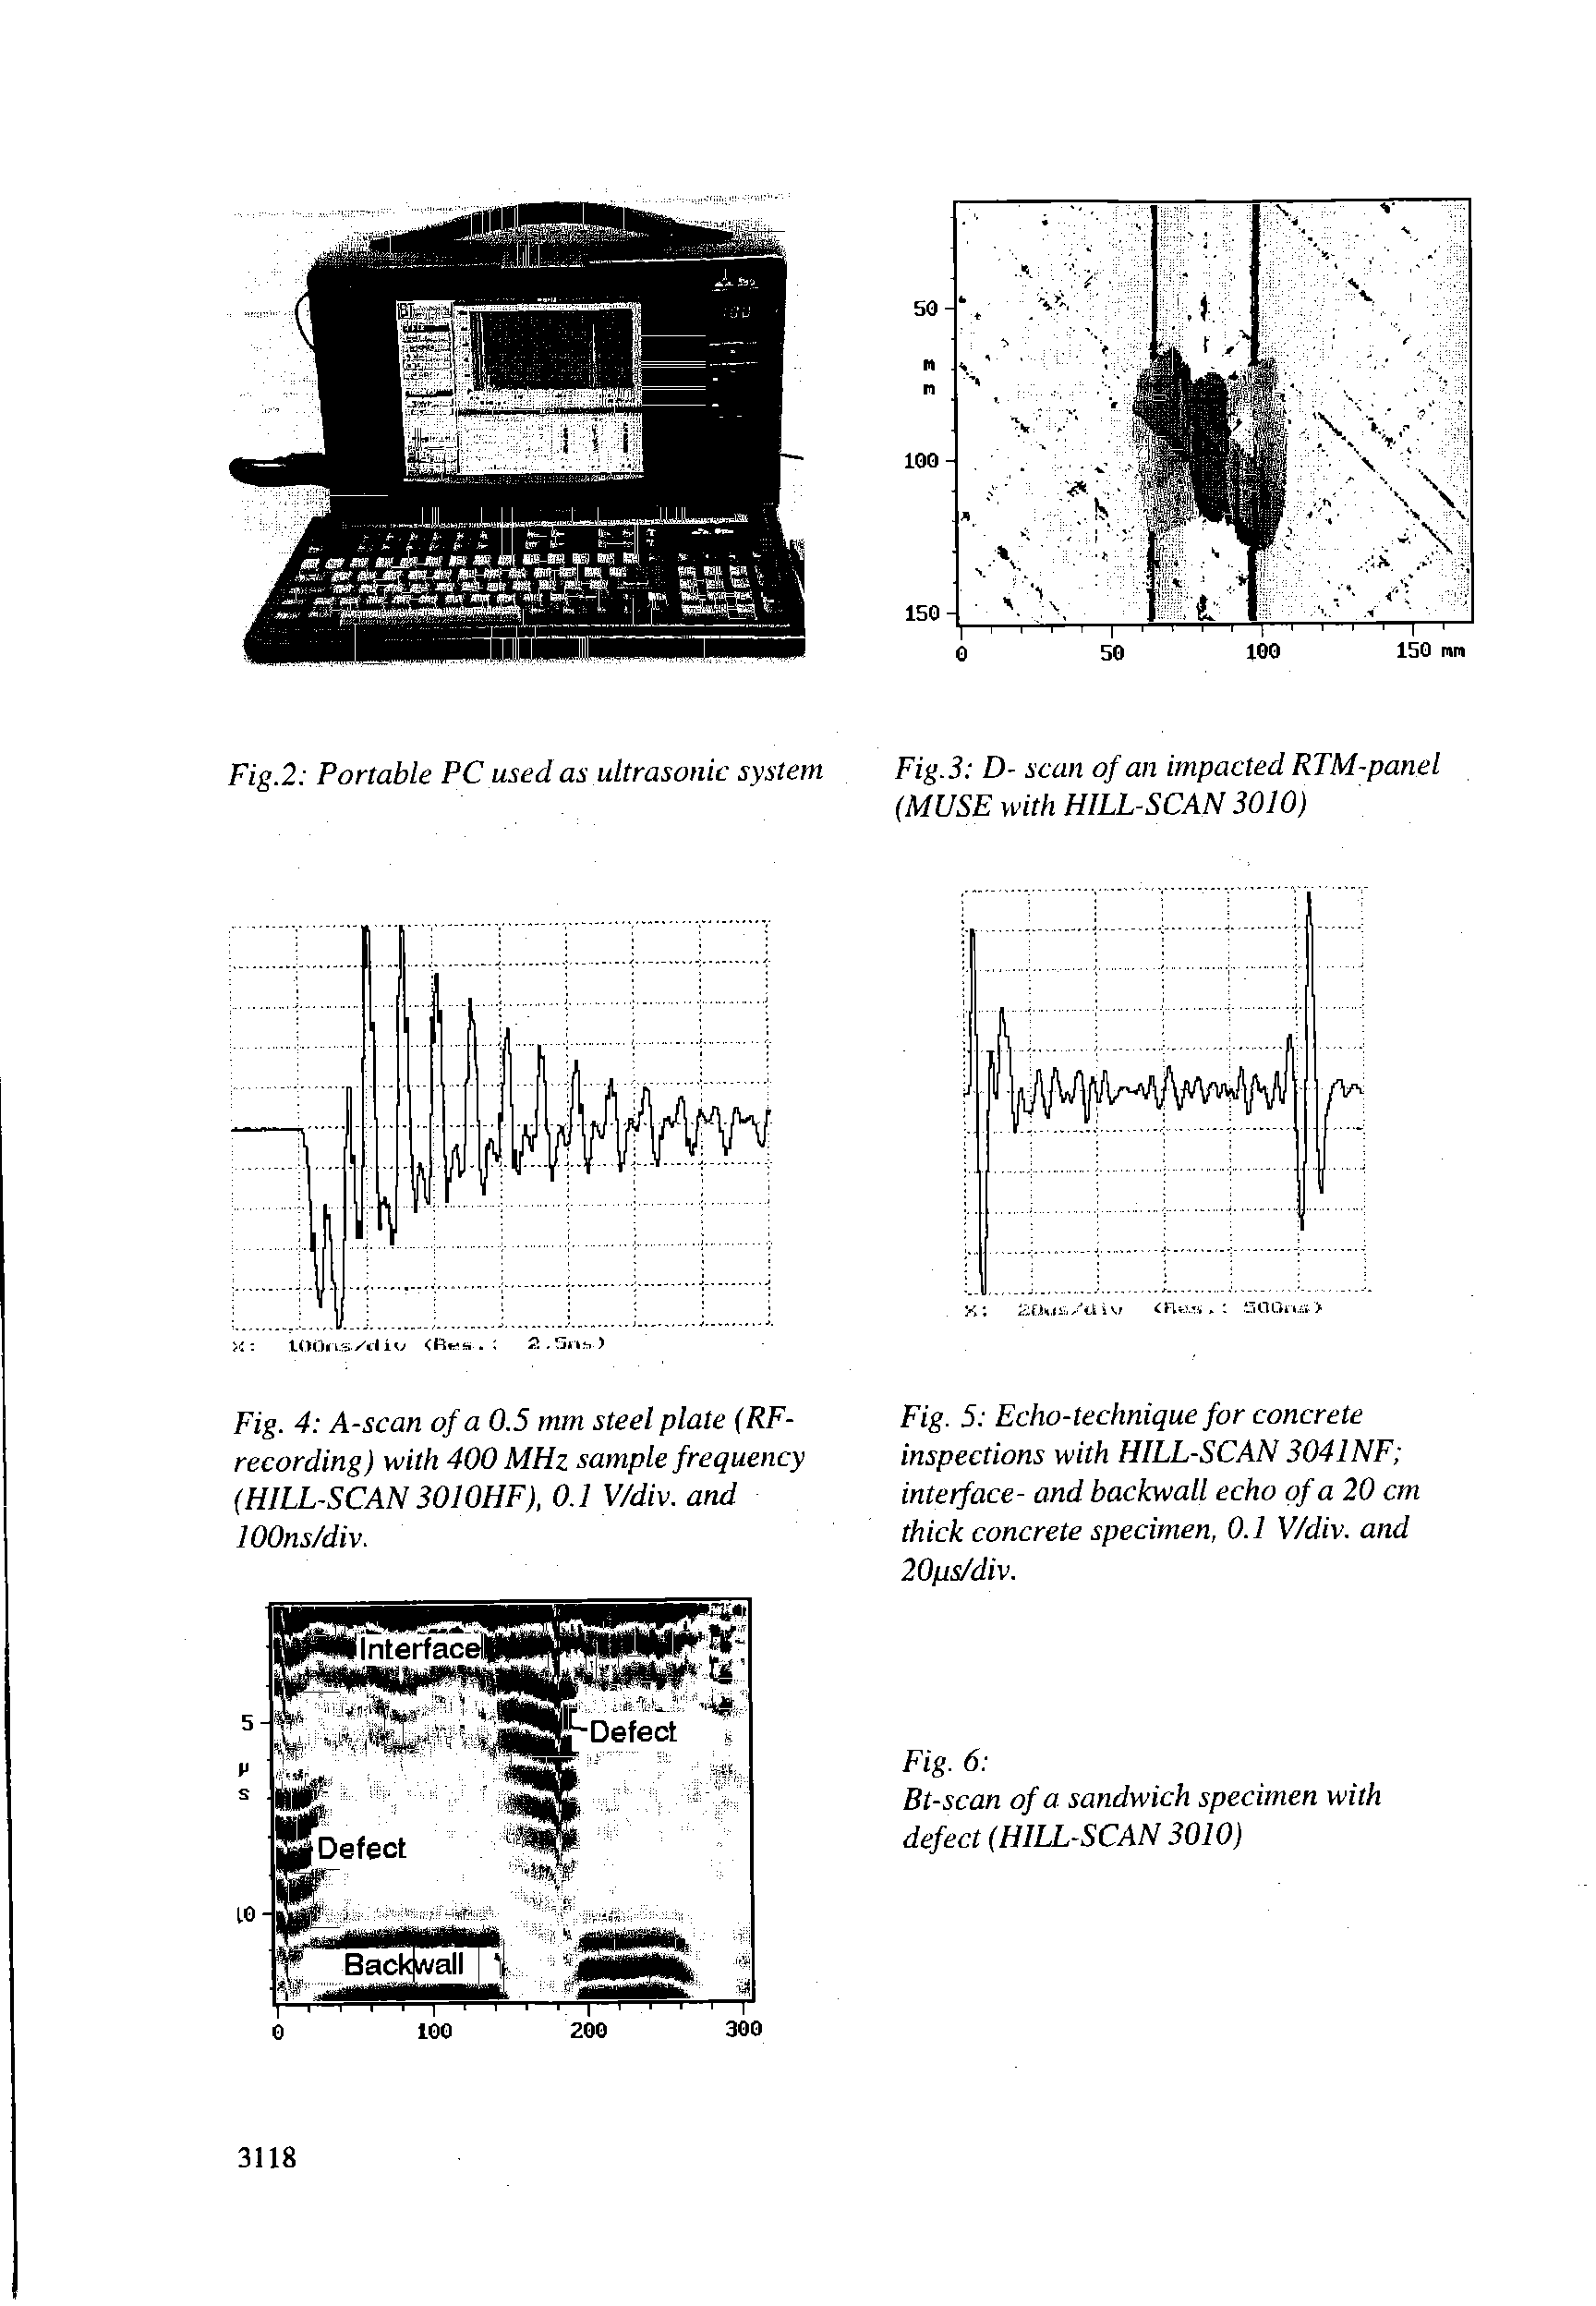 Fig. 4 A-scan of a 0.5 mm steel plate (RF-recording) with 400 MHz sample frequency (HILL-SCAN 3010HF), 0.1 V/div. and lOOns/div.